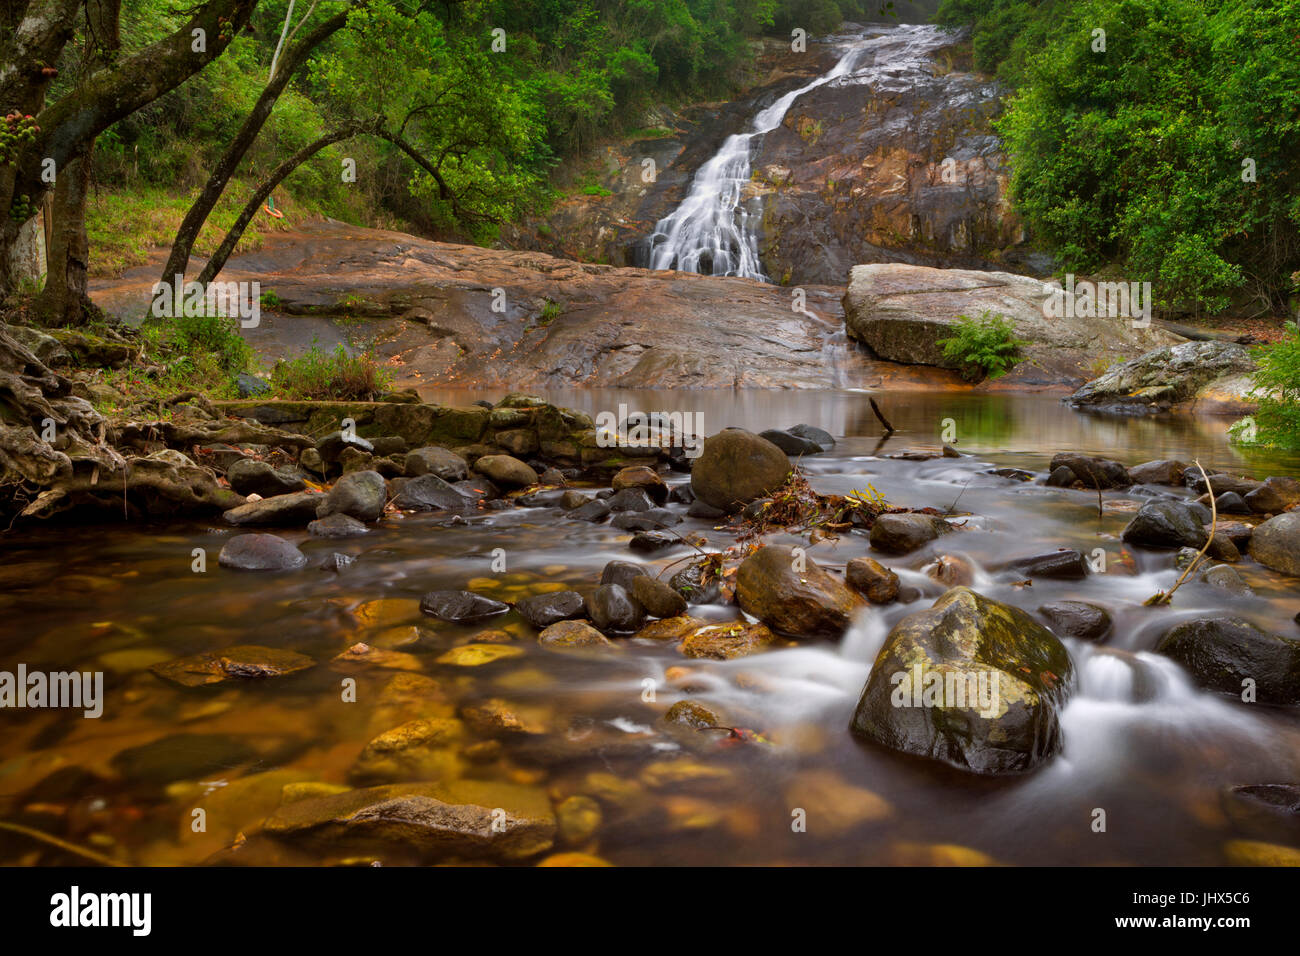 The Debengeni Falls in the Magoebaskloof in the north east of South Africa. Stock Photo